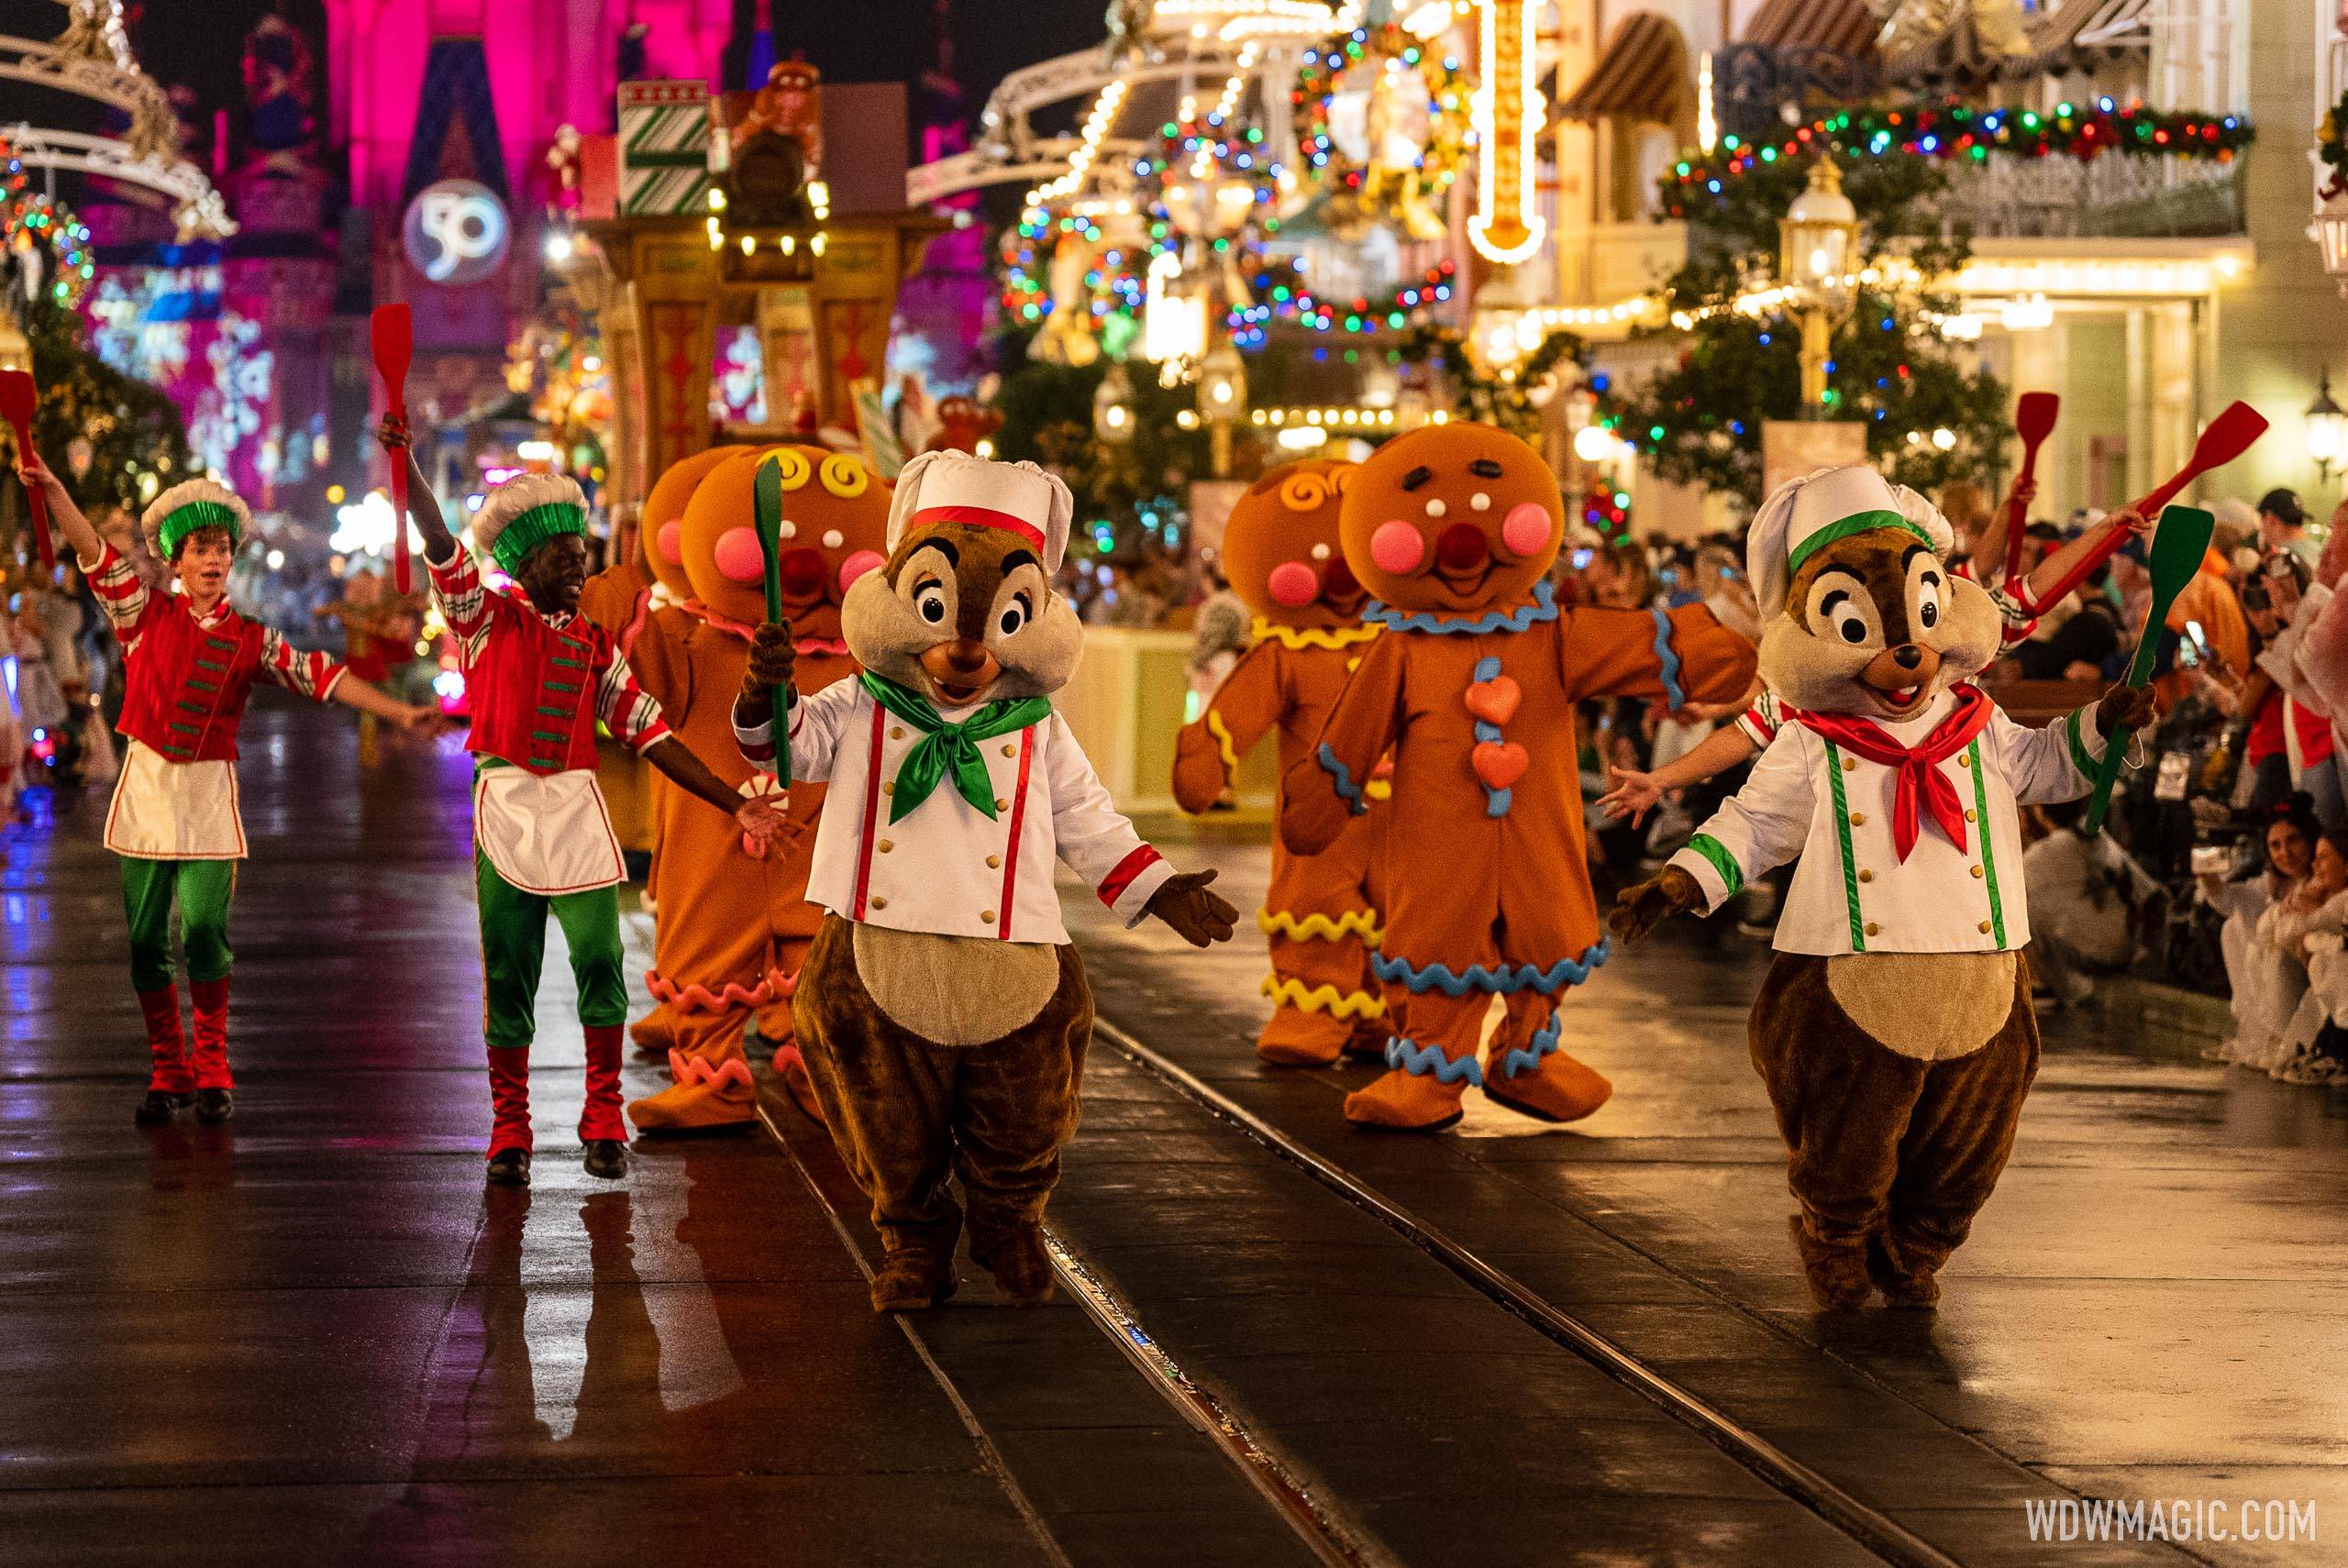 Video of this year's "Mickey’s Once Upon a Christmastime Parade"